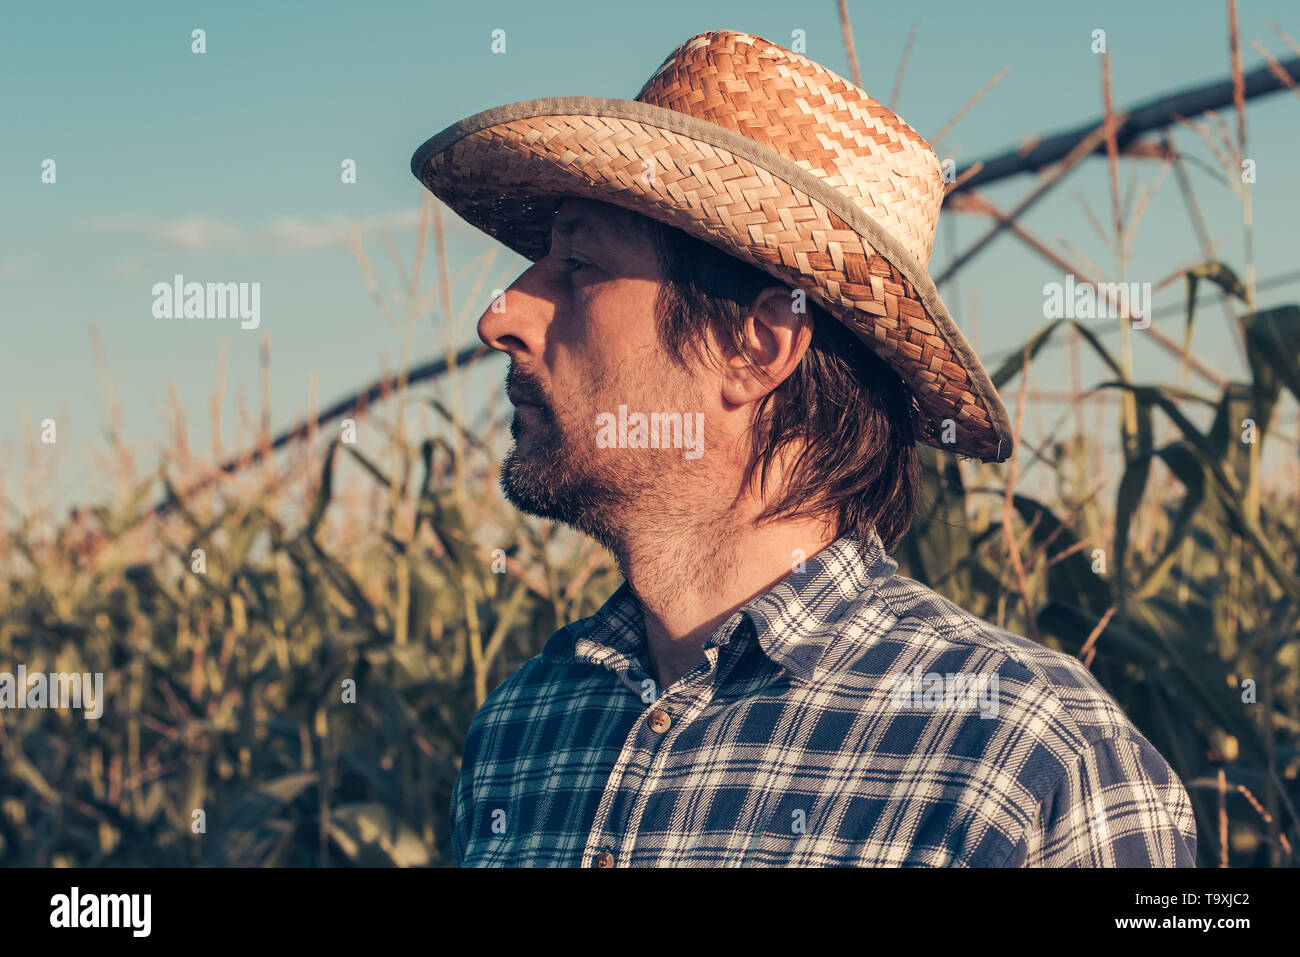 Serious confident agronomist farmer planning agricultural activity in corn field, looking self-assured and determined Stock Photo